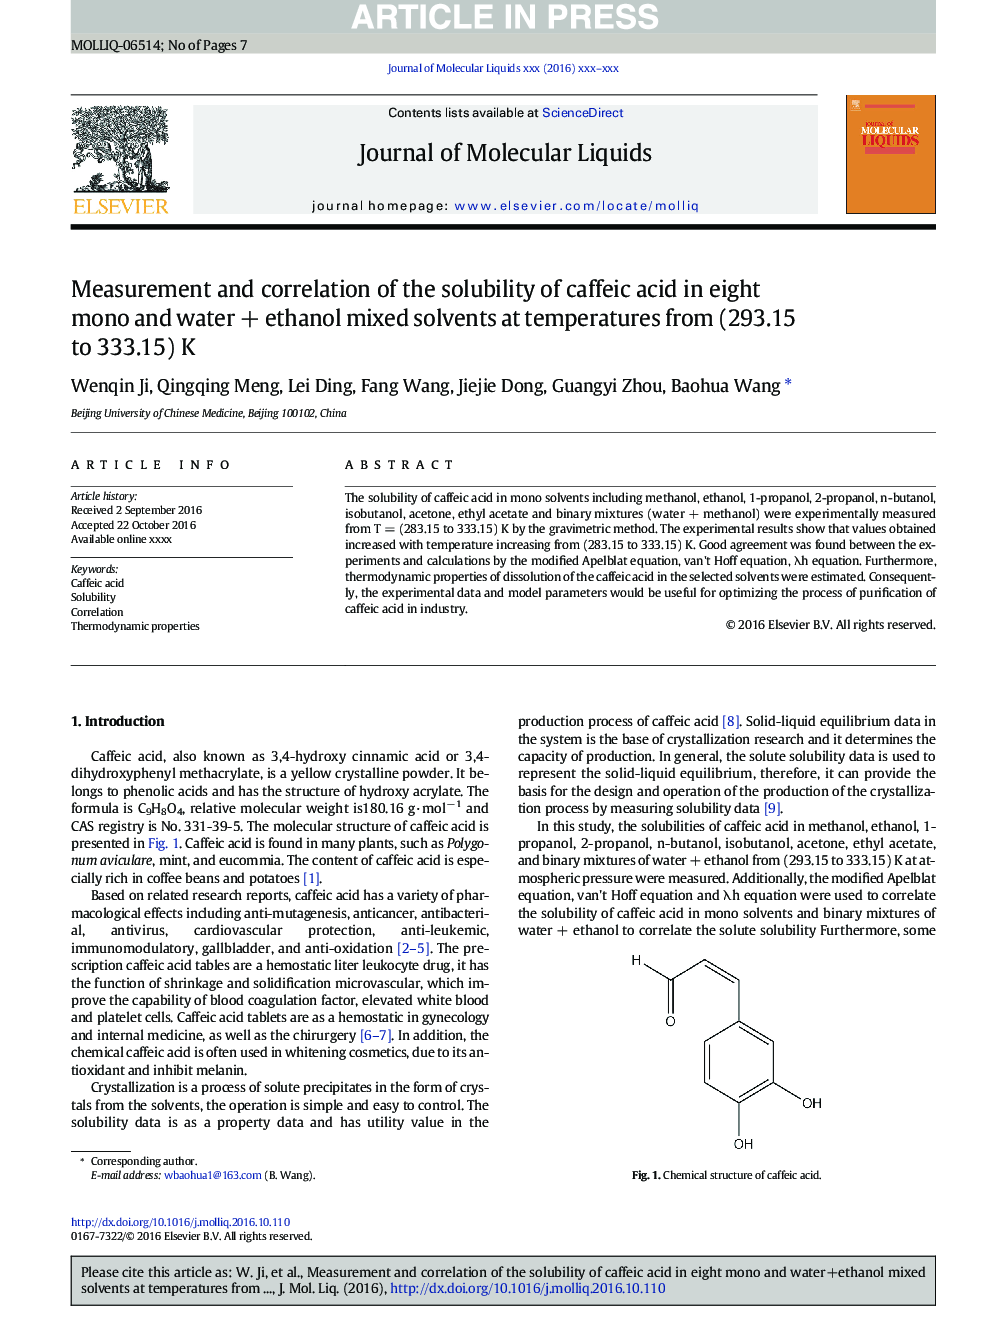 Measurement and correlation of the solubility of caffeic acid in eight mono and waterÂ +Â ethanol mixed solvents at temperatures from (293.15 to 333.15) K